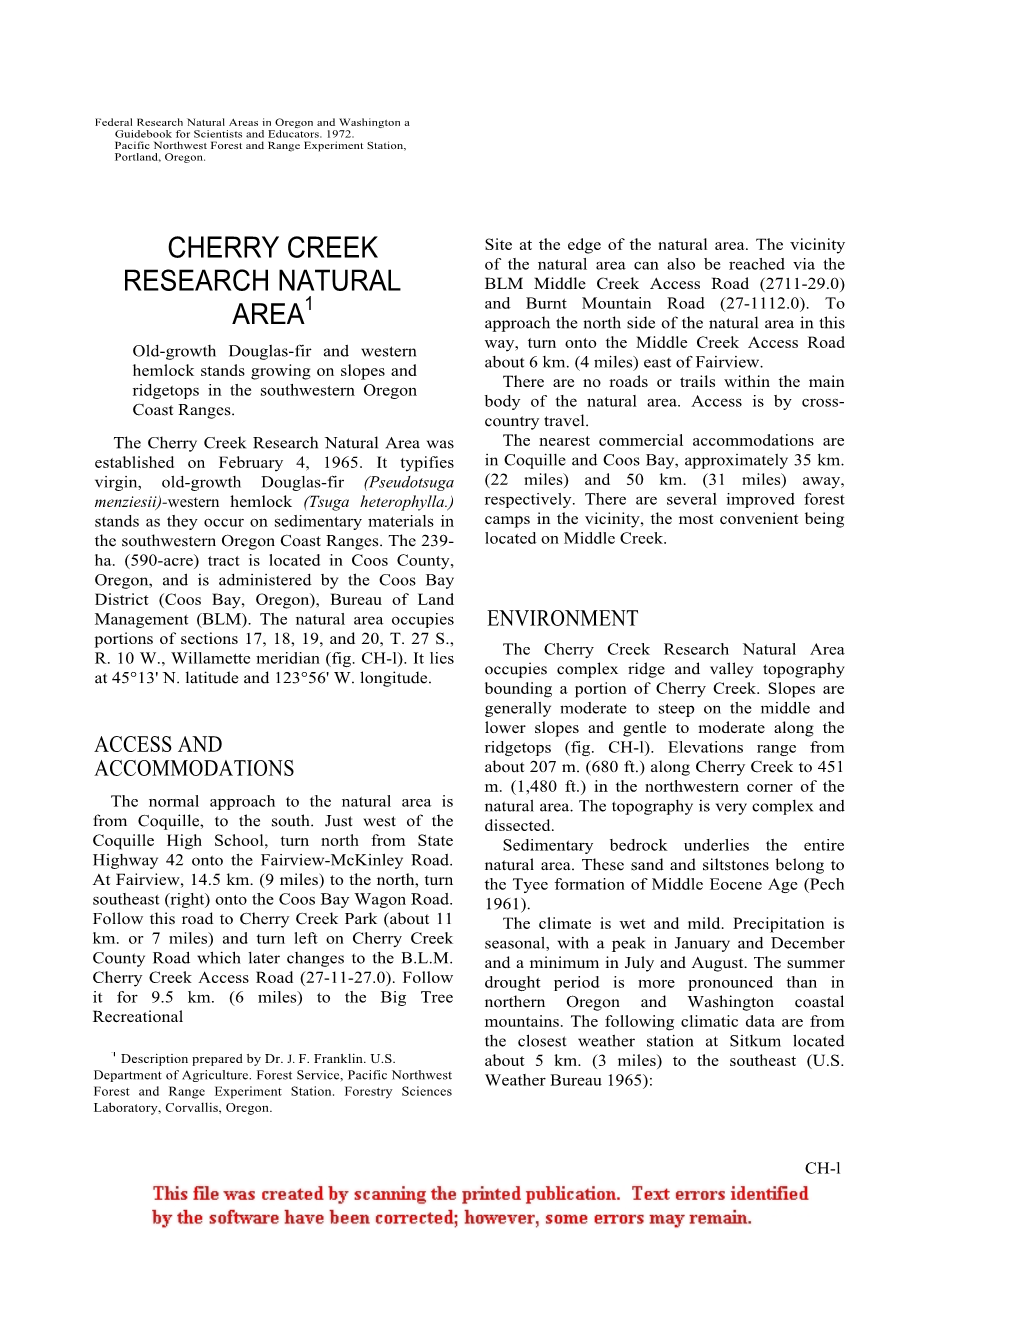 Cherry Creek Research Natural Area Was the Nearest Commercial Accommodations Are Established on February 4, 1965